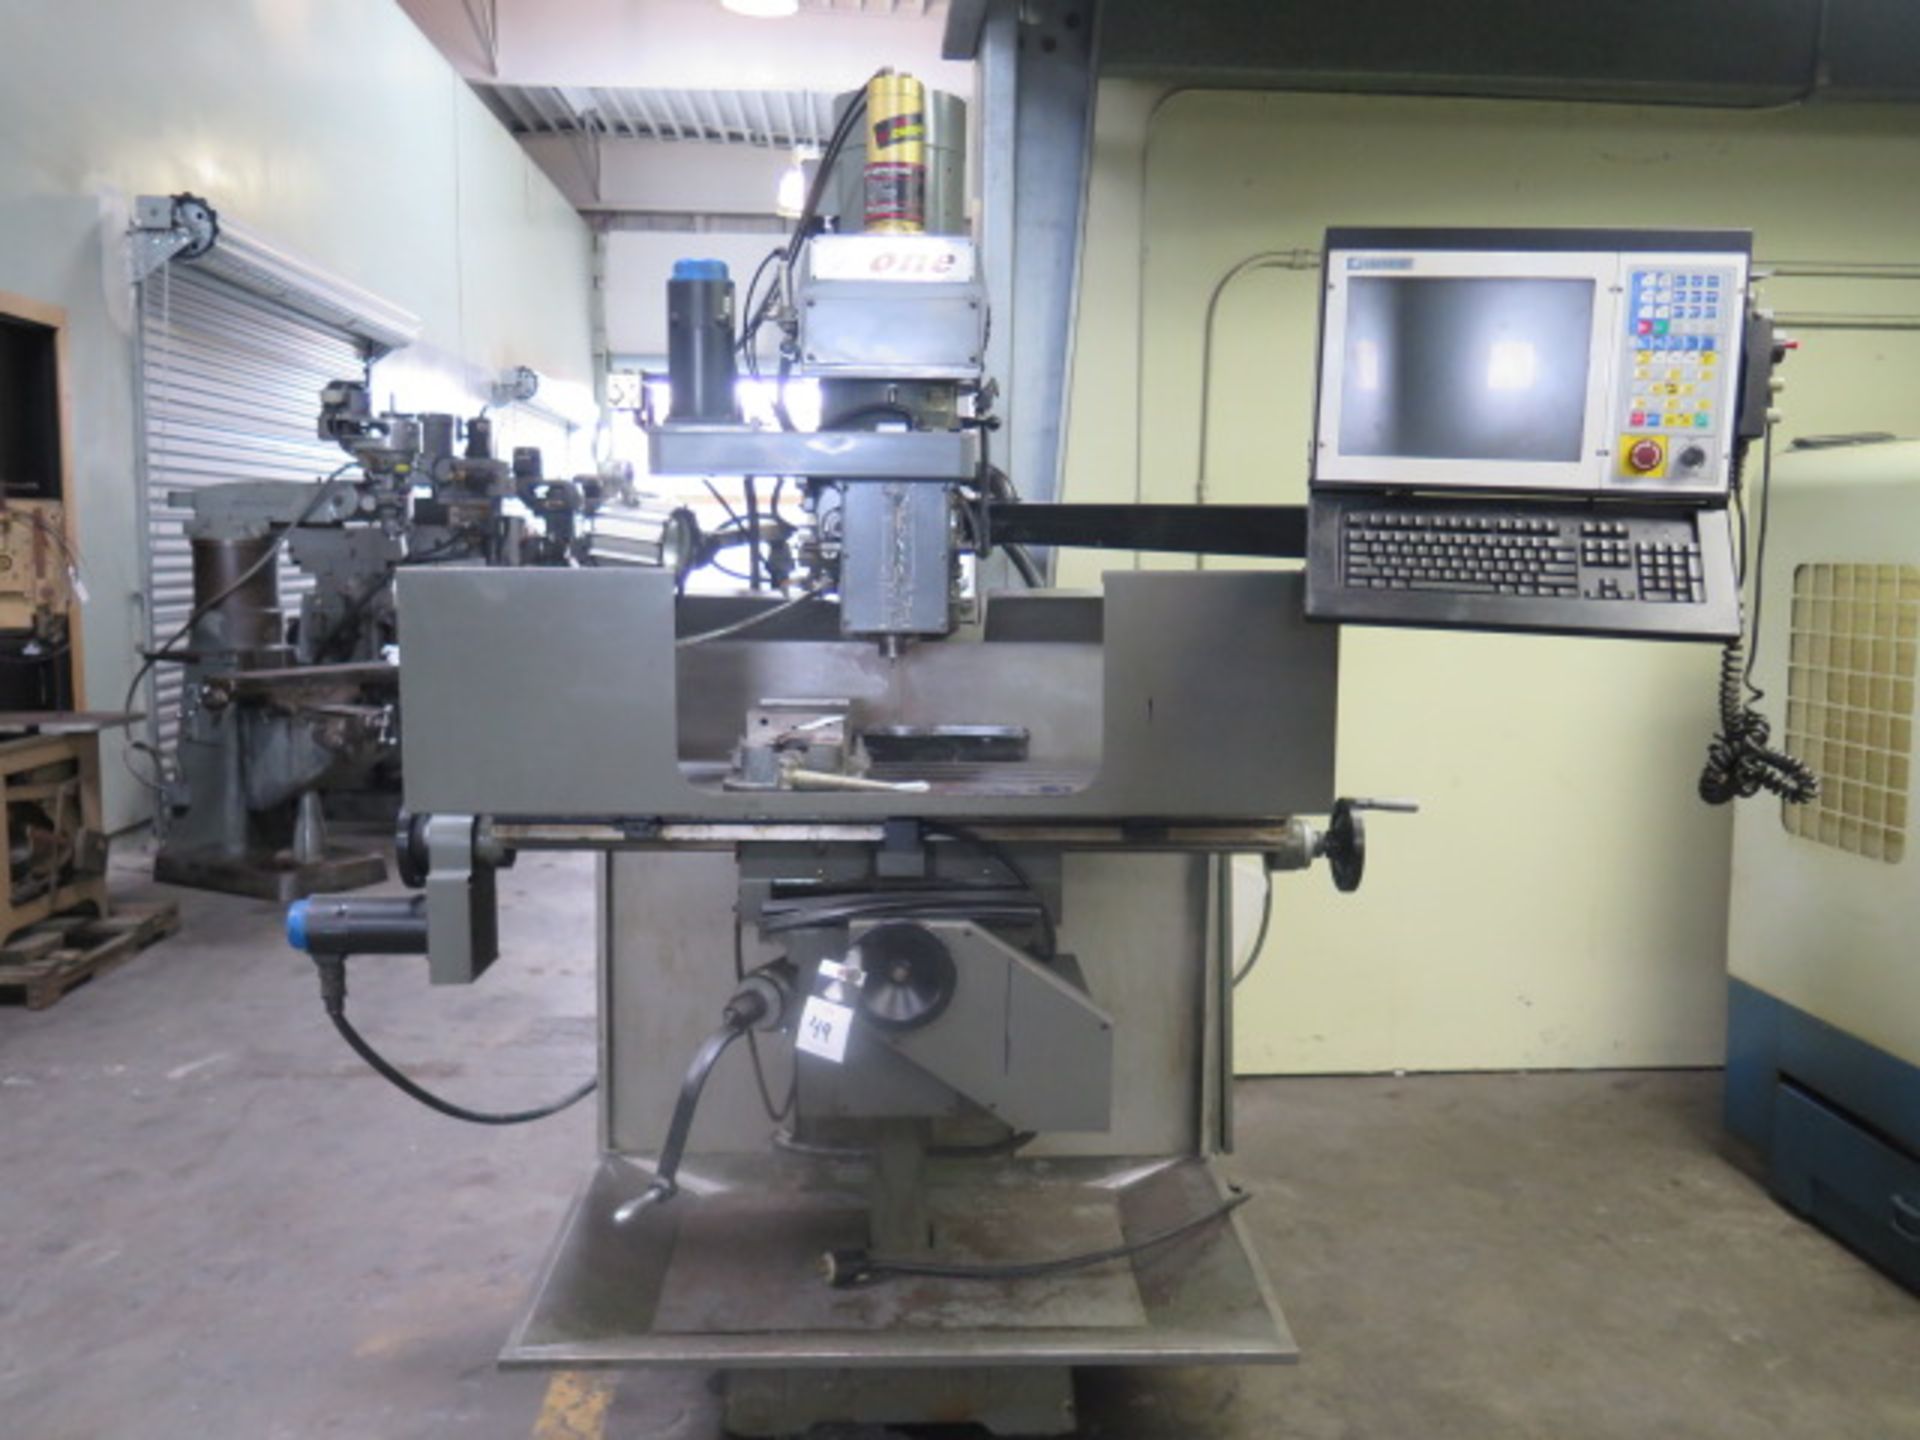 2006 Atrump “A One” 3VK WVERTER 3-Axis CNC Vertical Mill s/n 95041 w/ Centroid Controls, Hand Wheel,